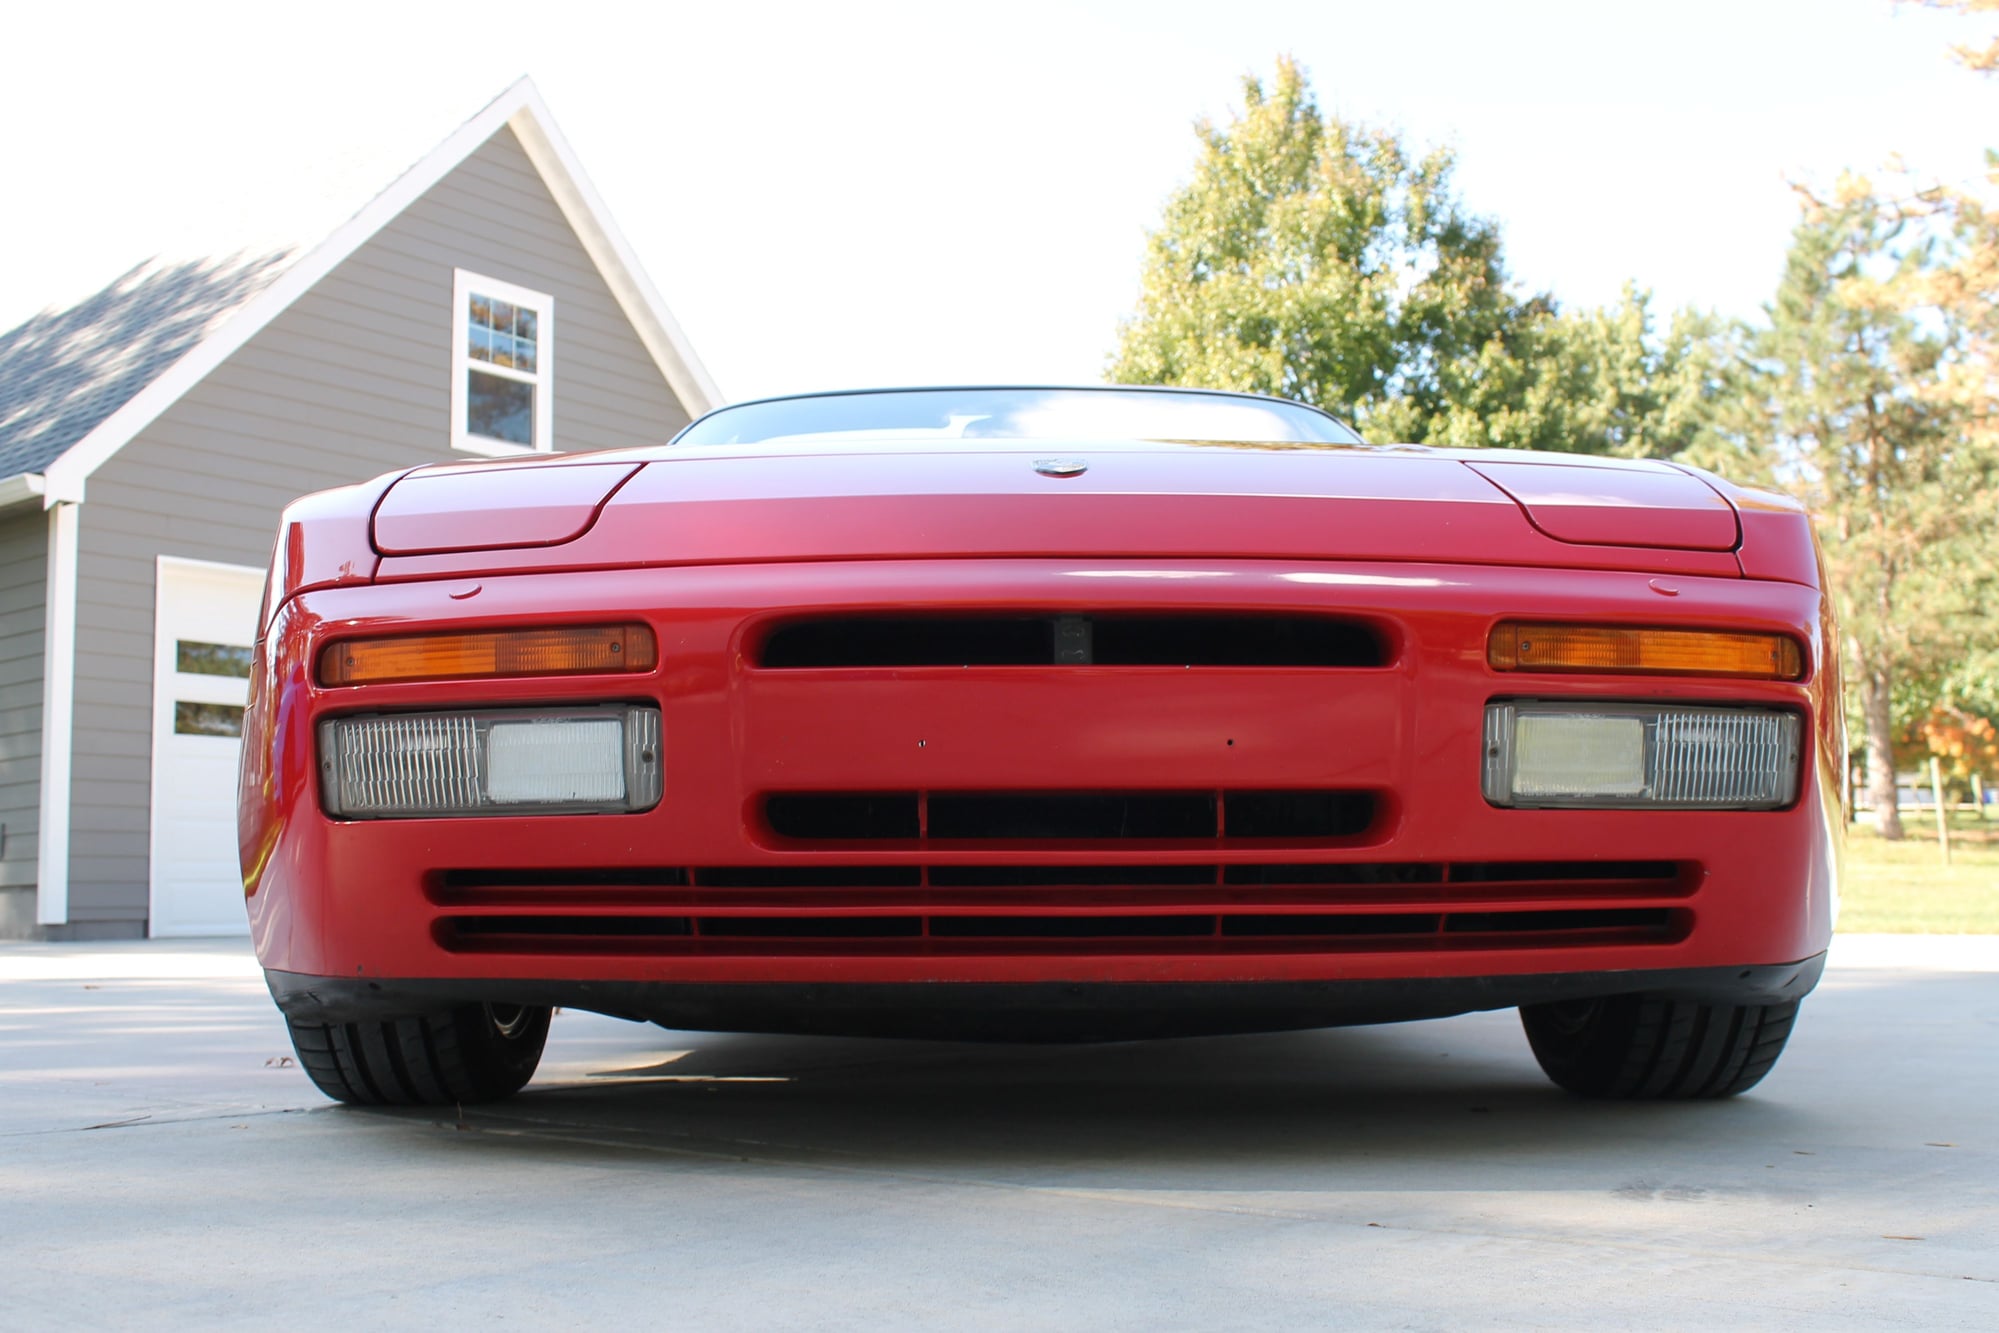 1991 Porsche 944 - 1991 Porsche 944S2 Cabriolet - Used - VIN WP0CB2947MN440315 - 96,200 Miles - 4 cyl - 2WD - Manual - Convertible - Red - Olathe, KS 66062, United States